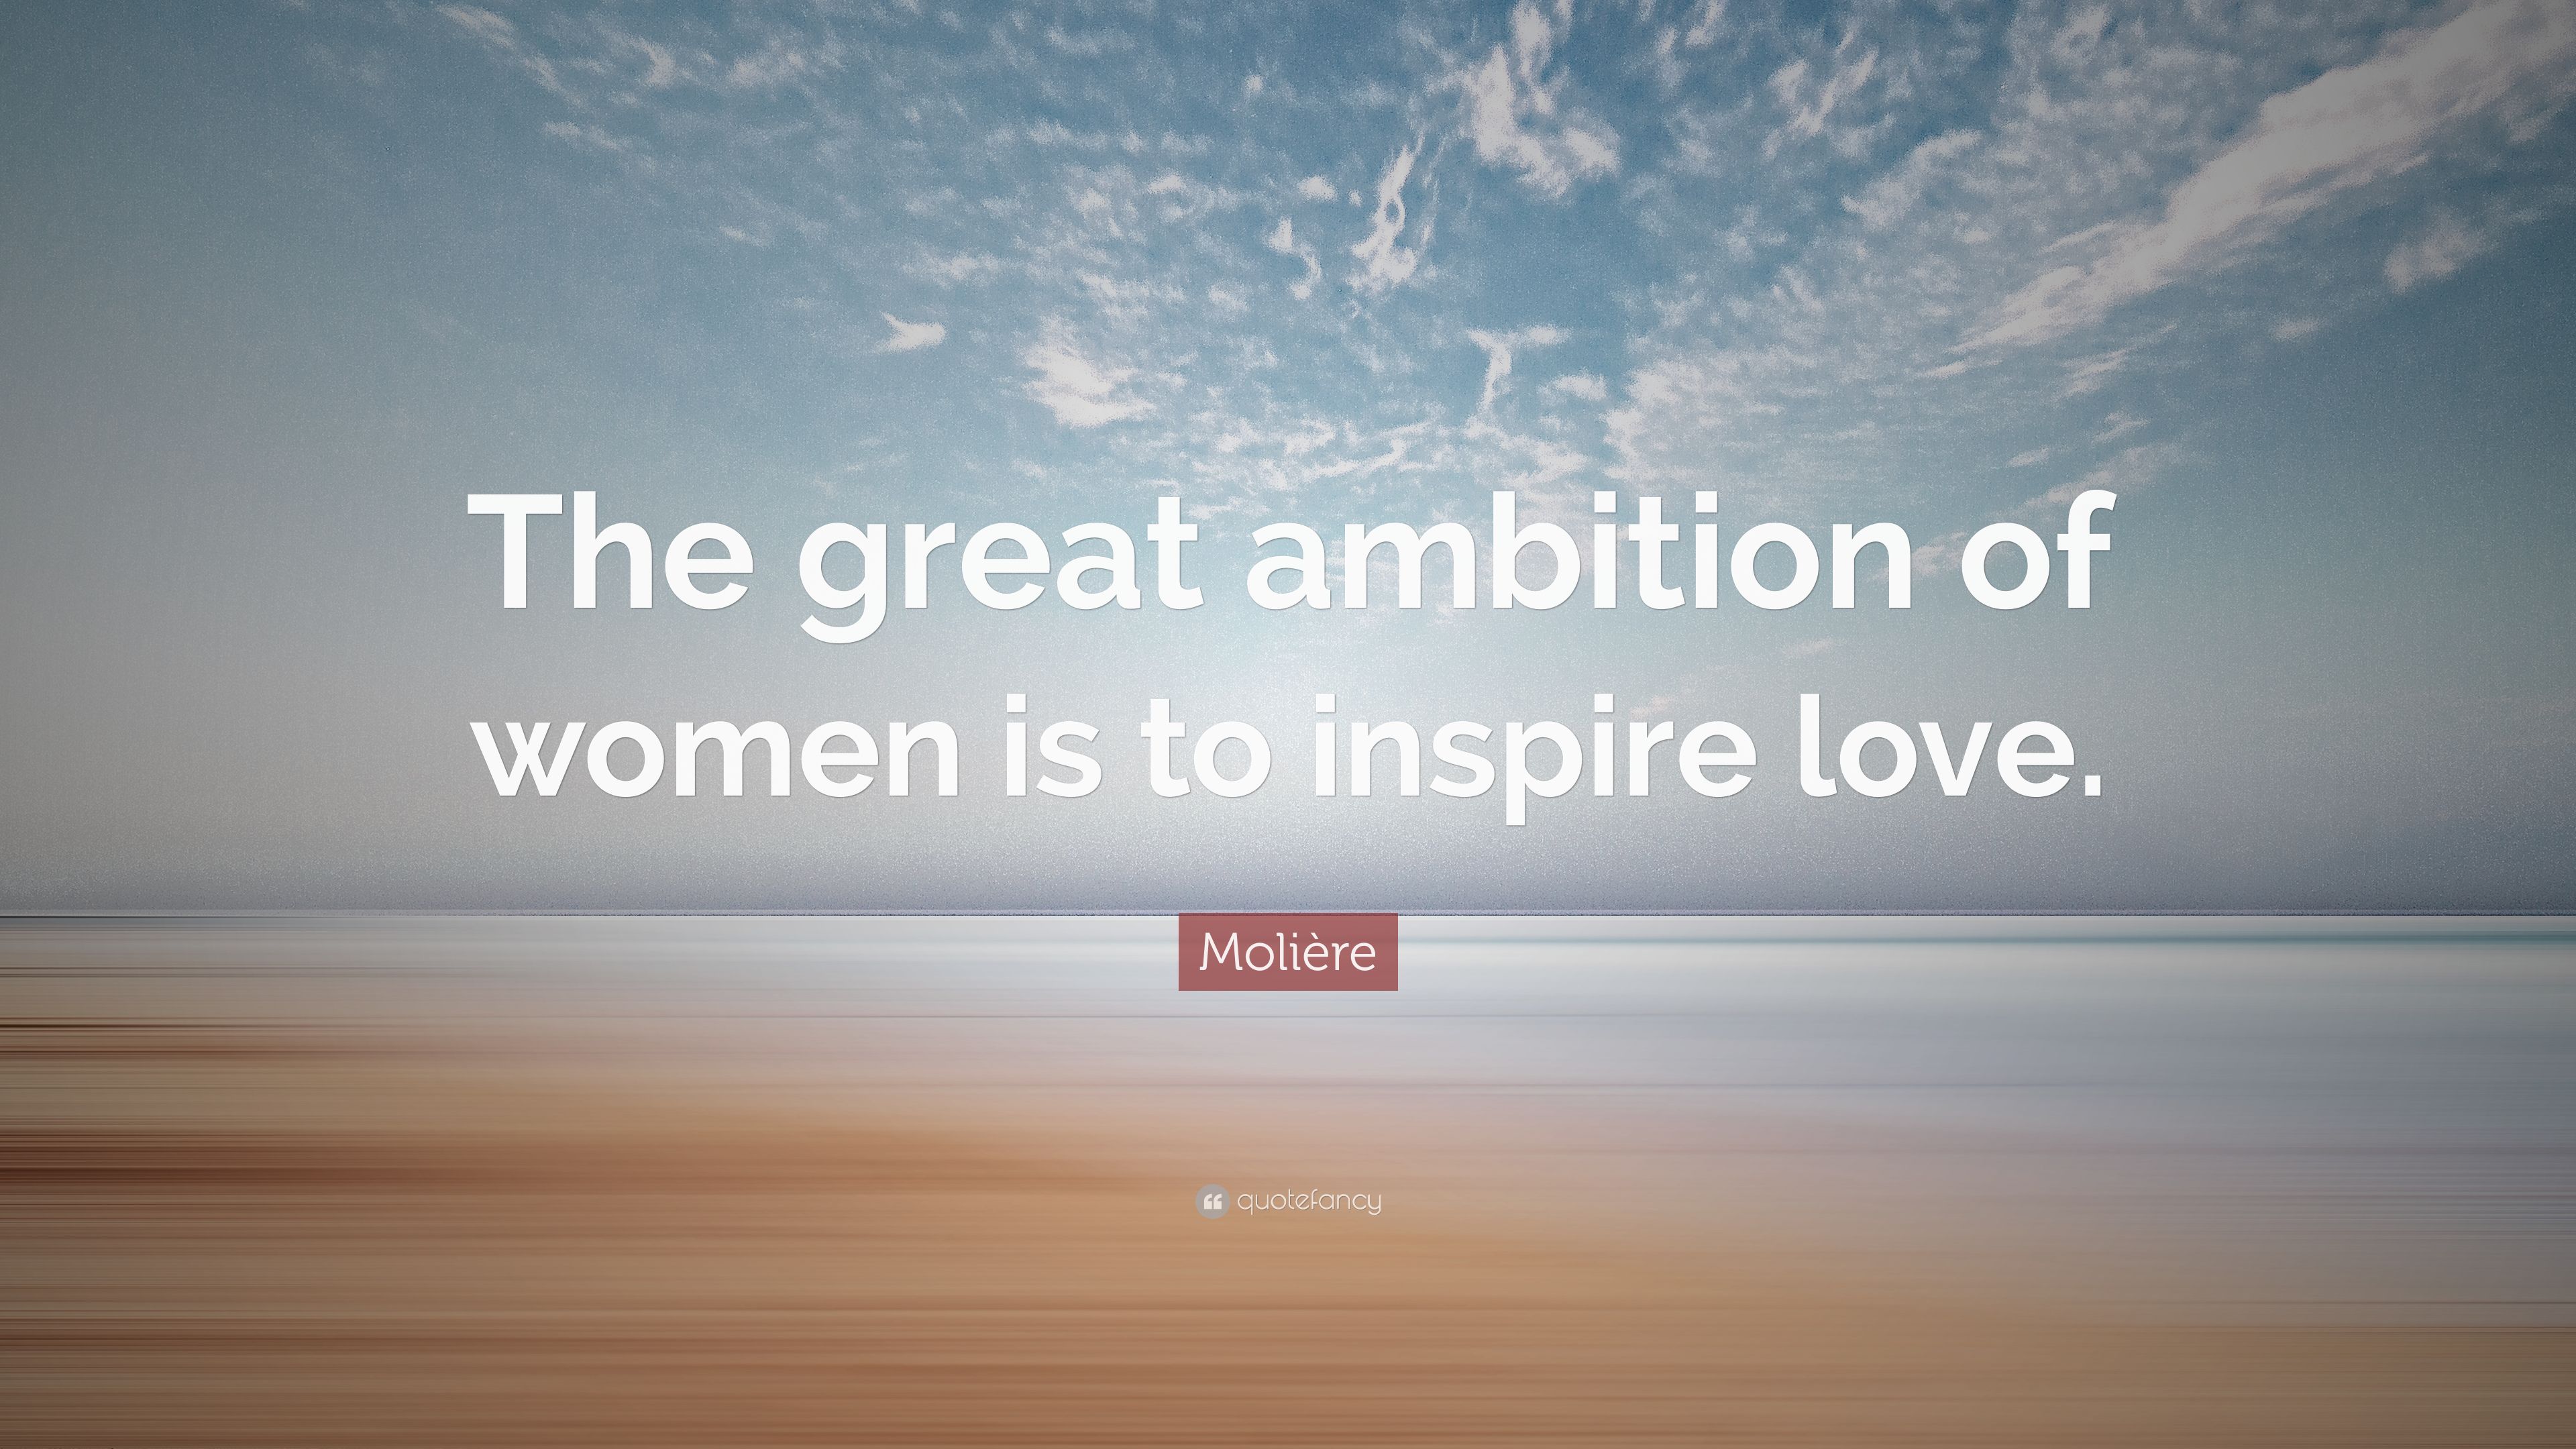 Molière Quote: “The great ambition of women is to inspire love.”